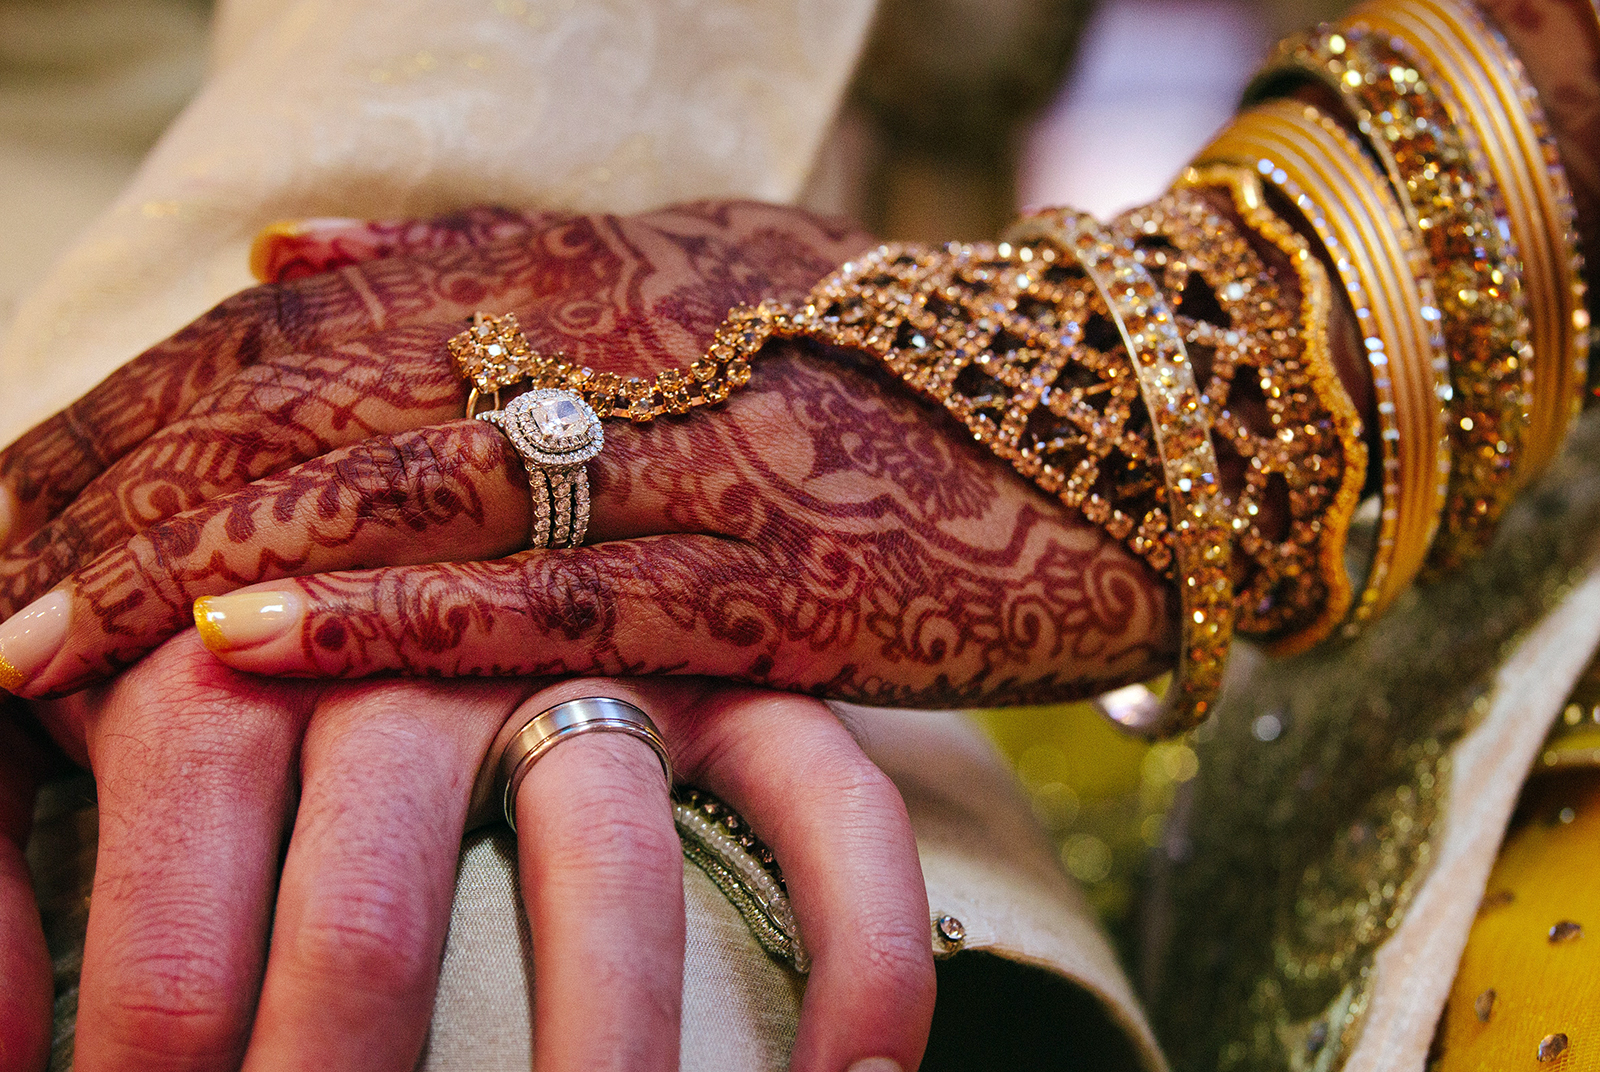 How American couples’ ‘inter-Hindu’ marriages are changing the faith thumbnail